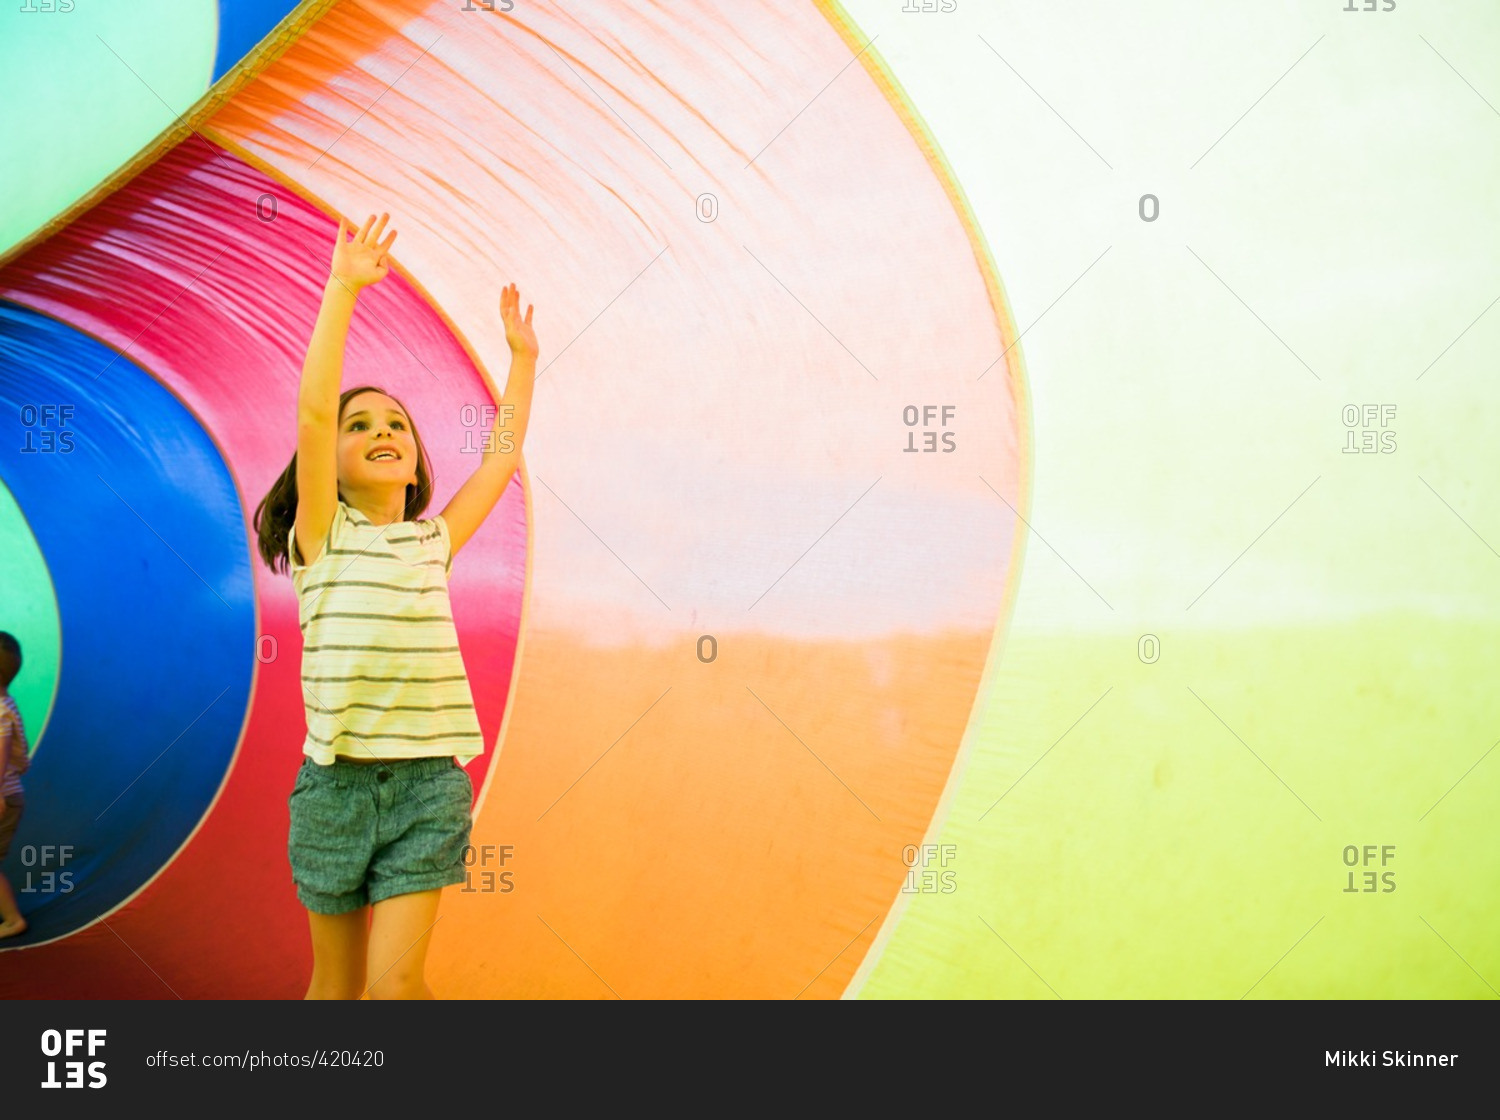 Girl playing inside an inflatable rainbow parachute